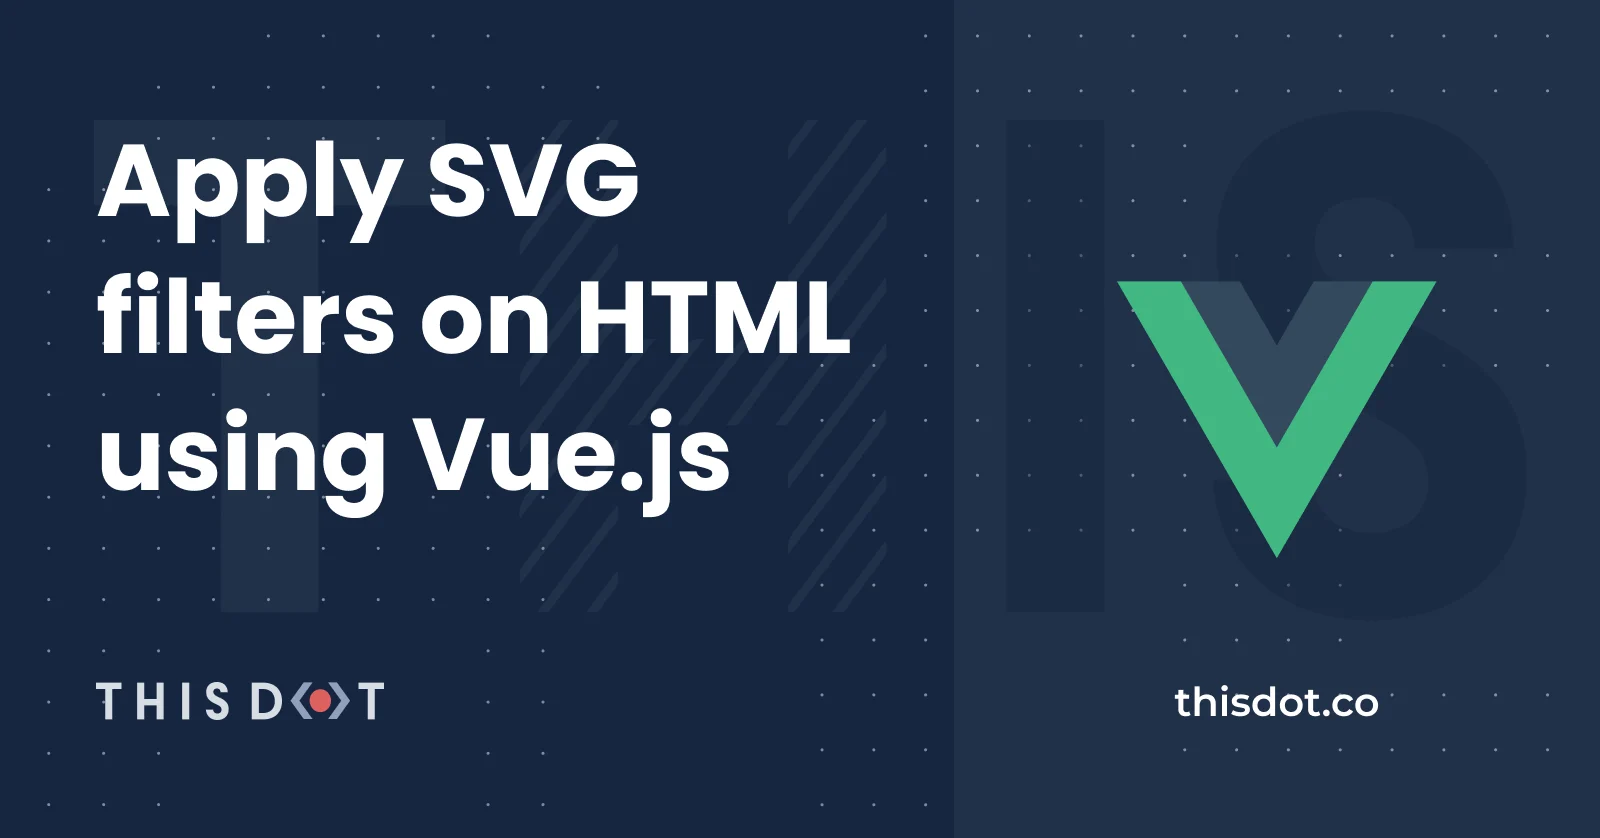 Apply SVG filters on HTML using Vue.js cover image